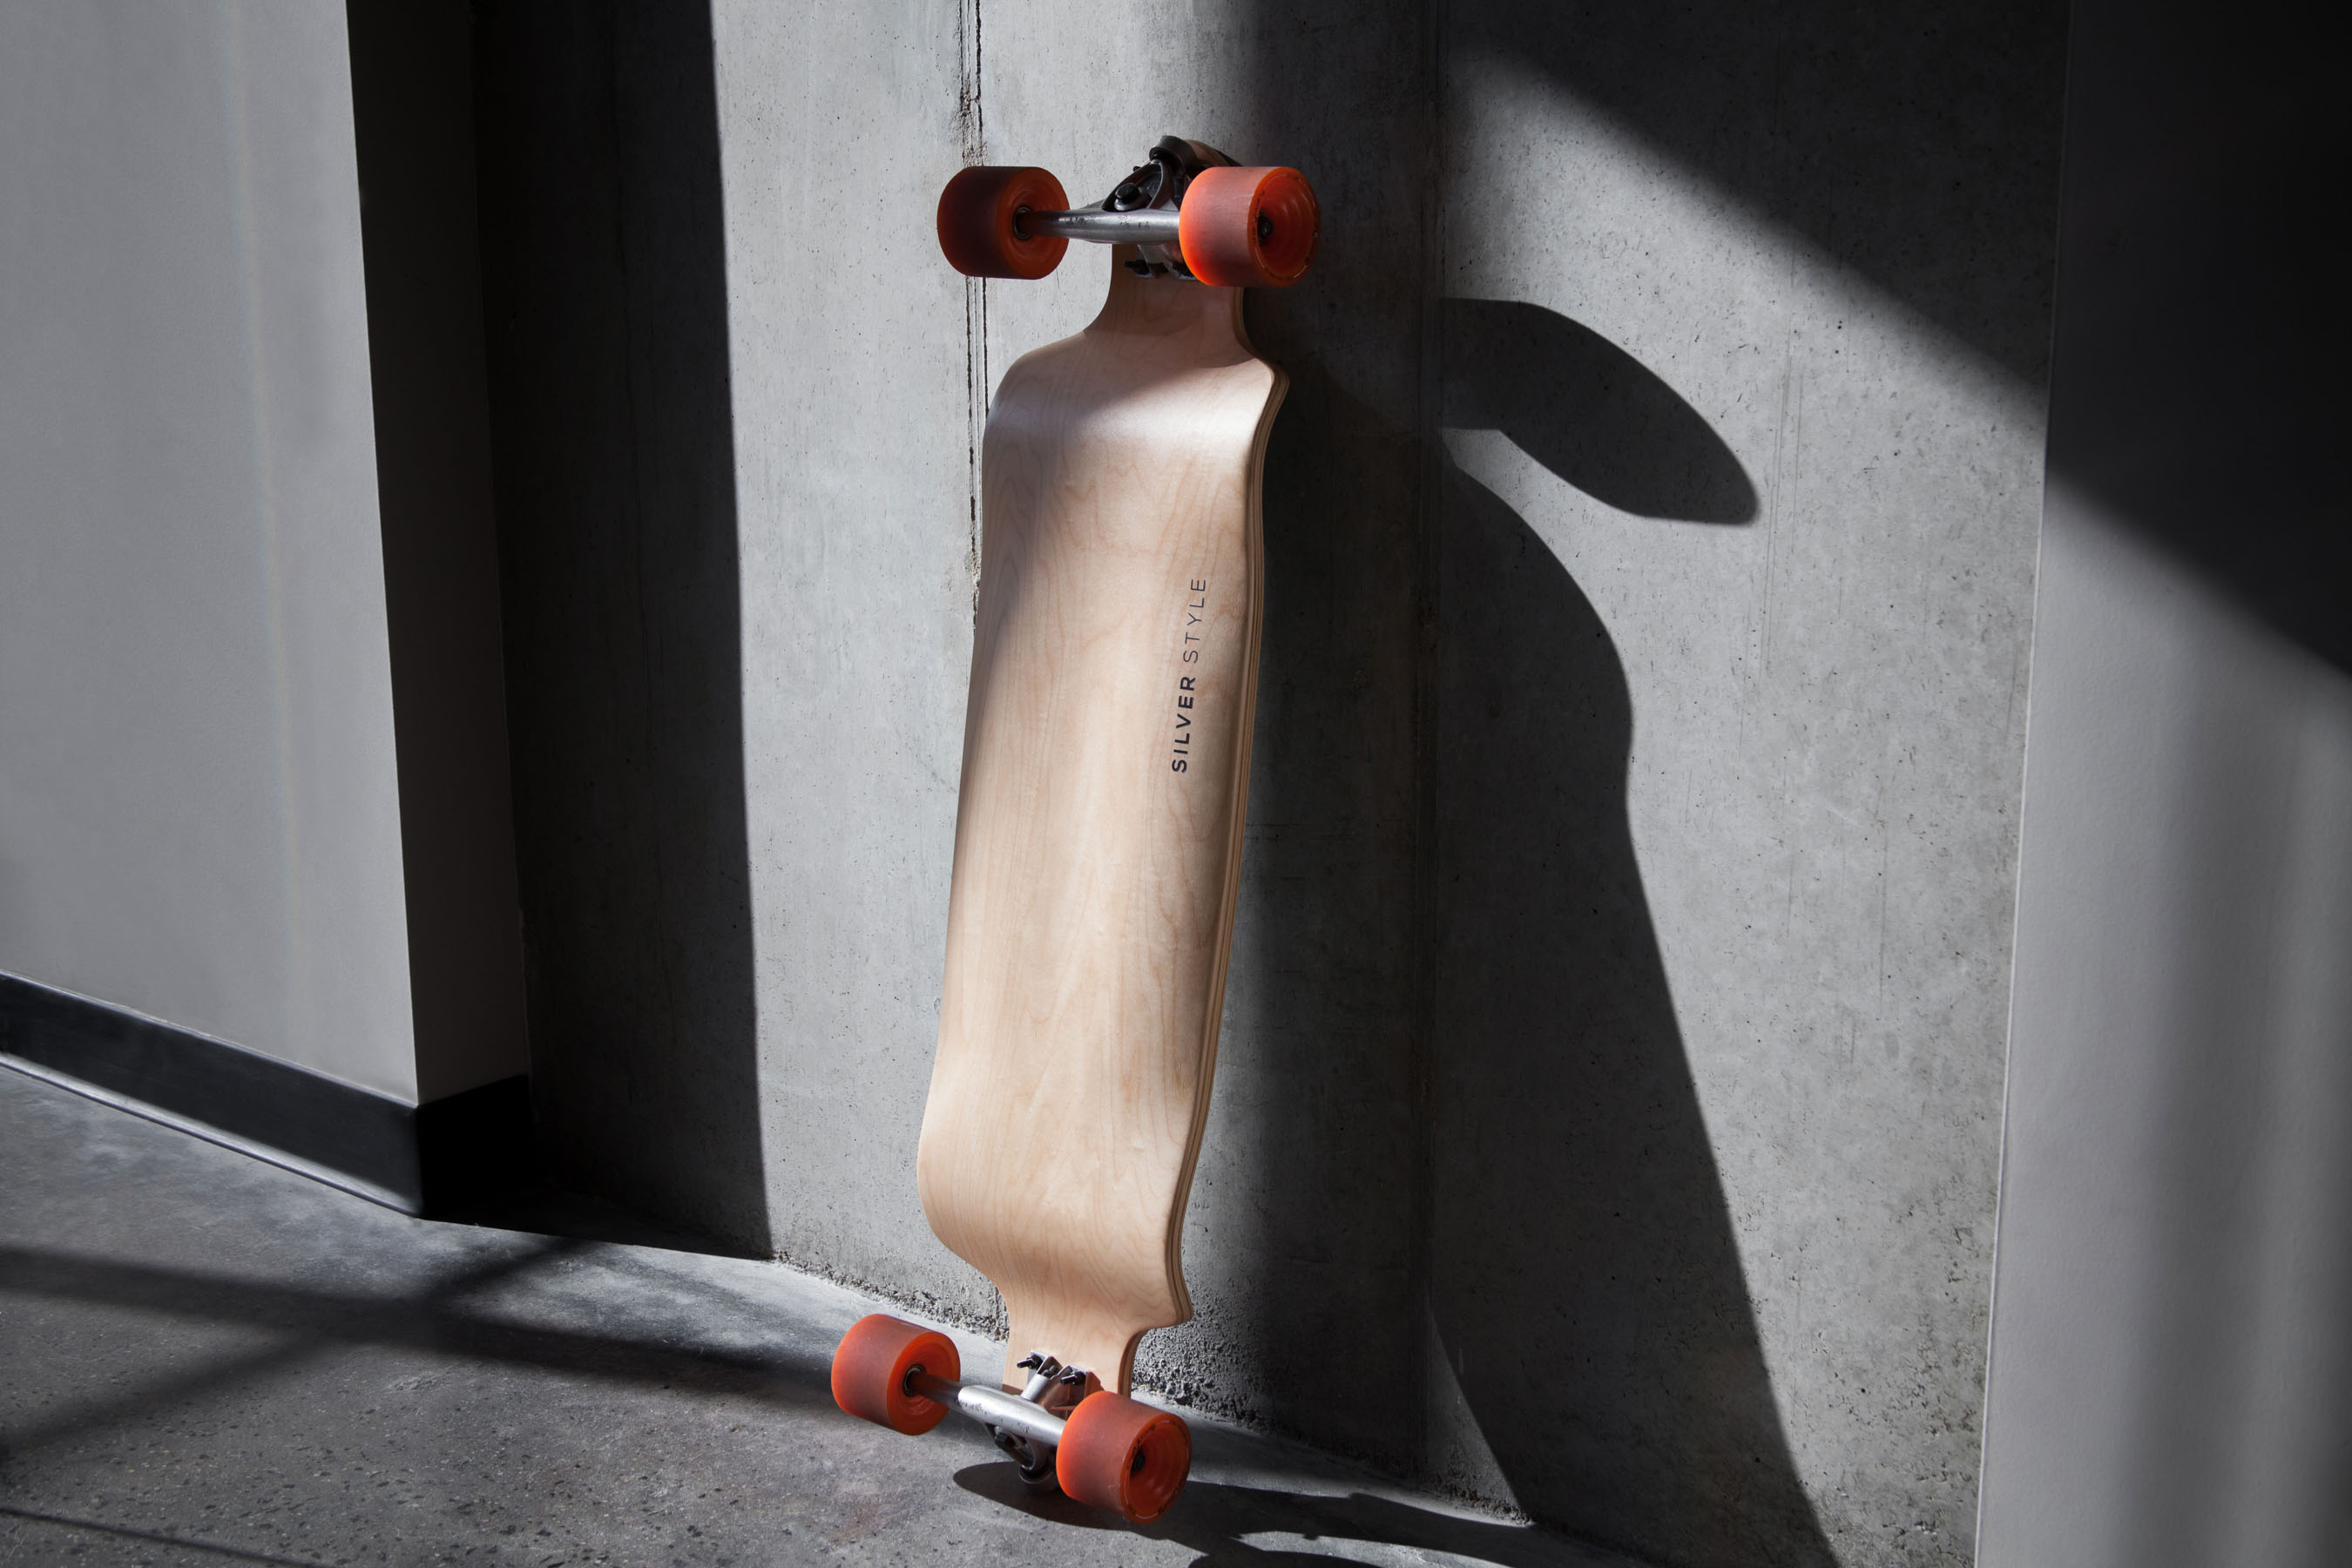 Longboard in the Sunlight at Silver Style HQ